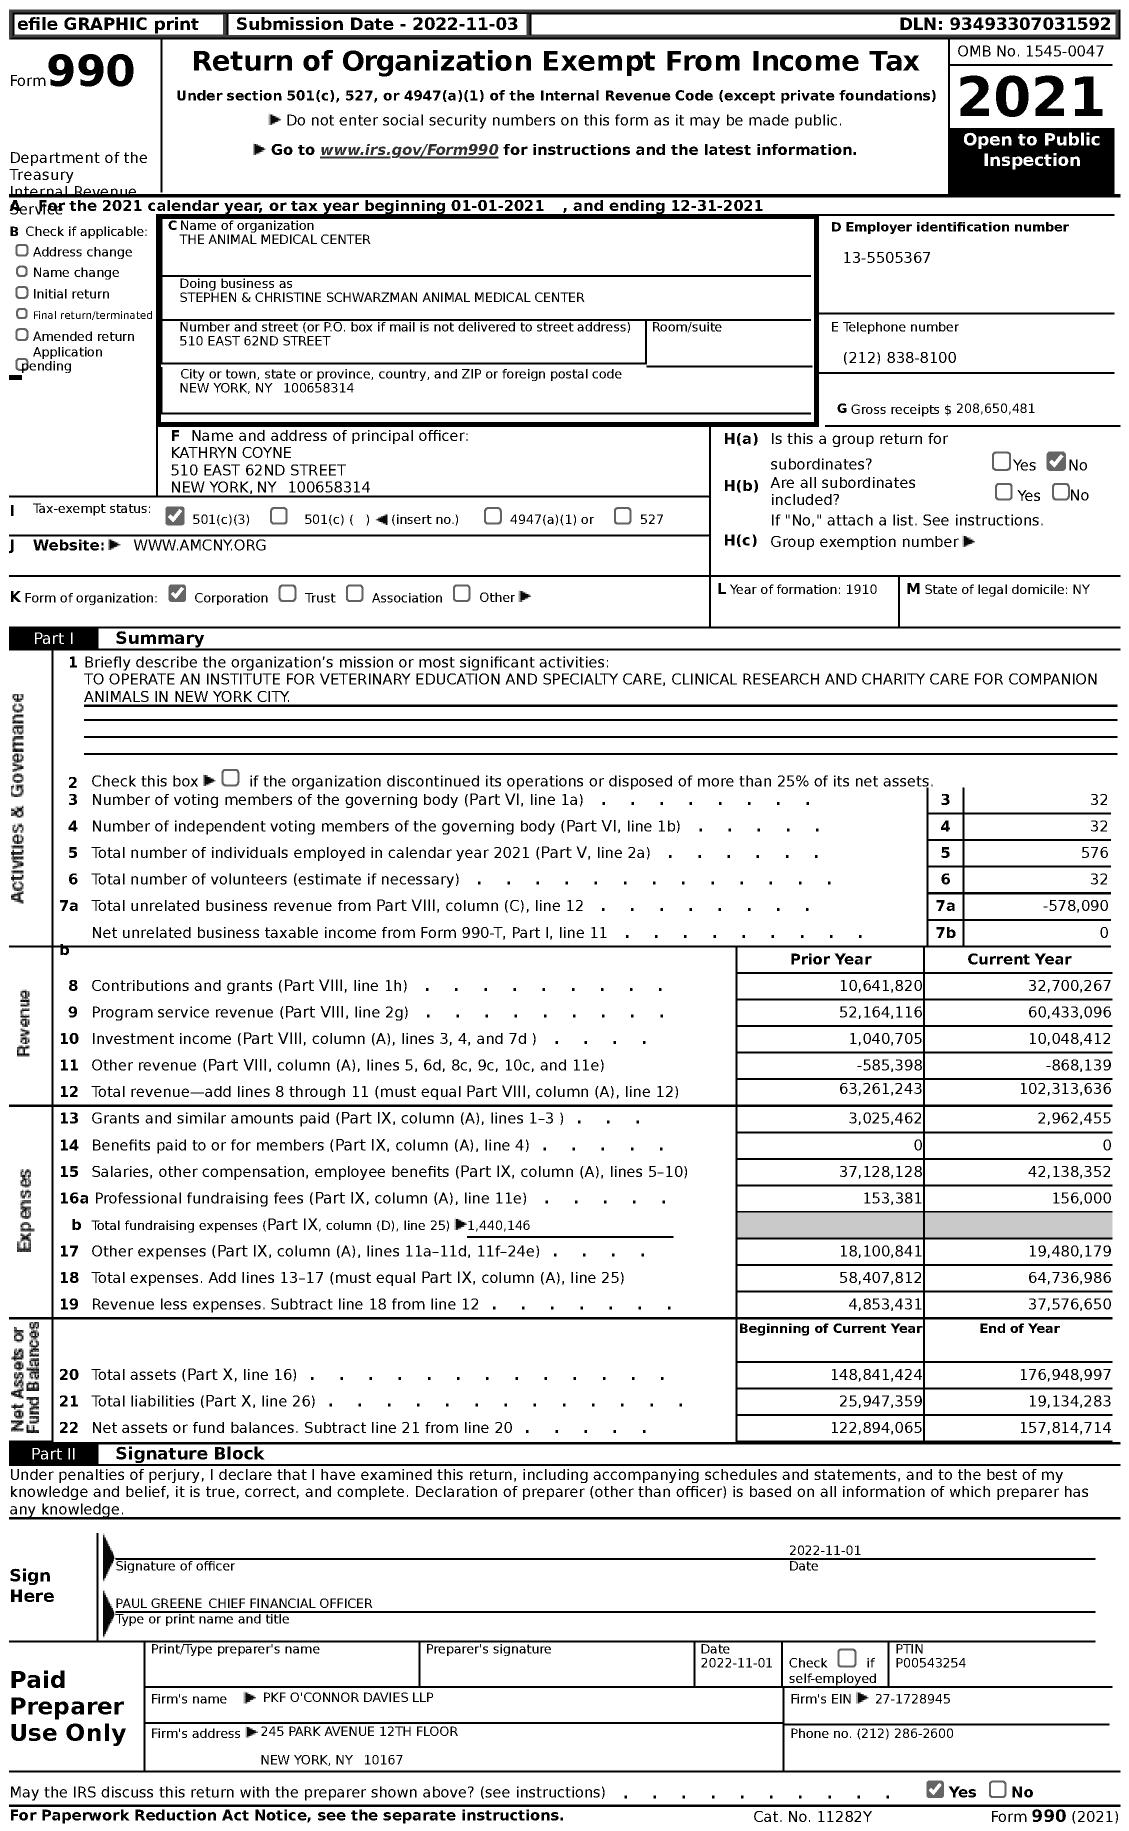 Image of first page of 2021 Form 990 for Stephen and Christine Schwarzman Animal Medical Center (AMC)